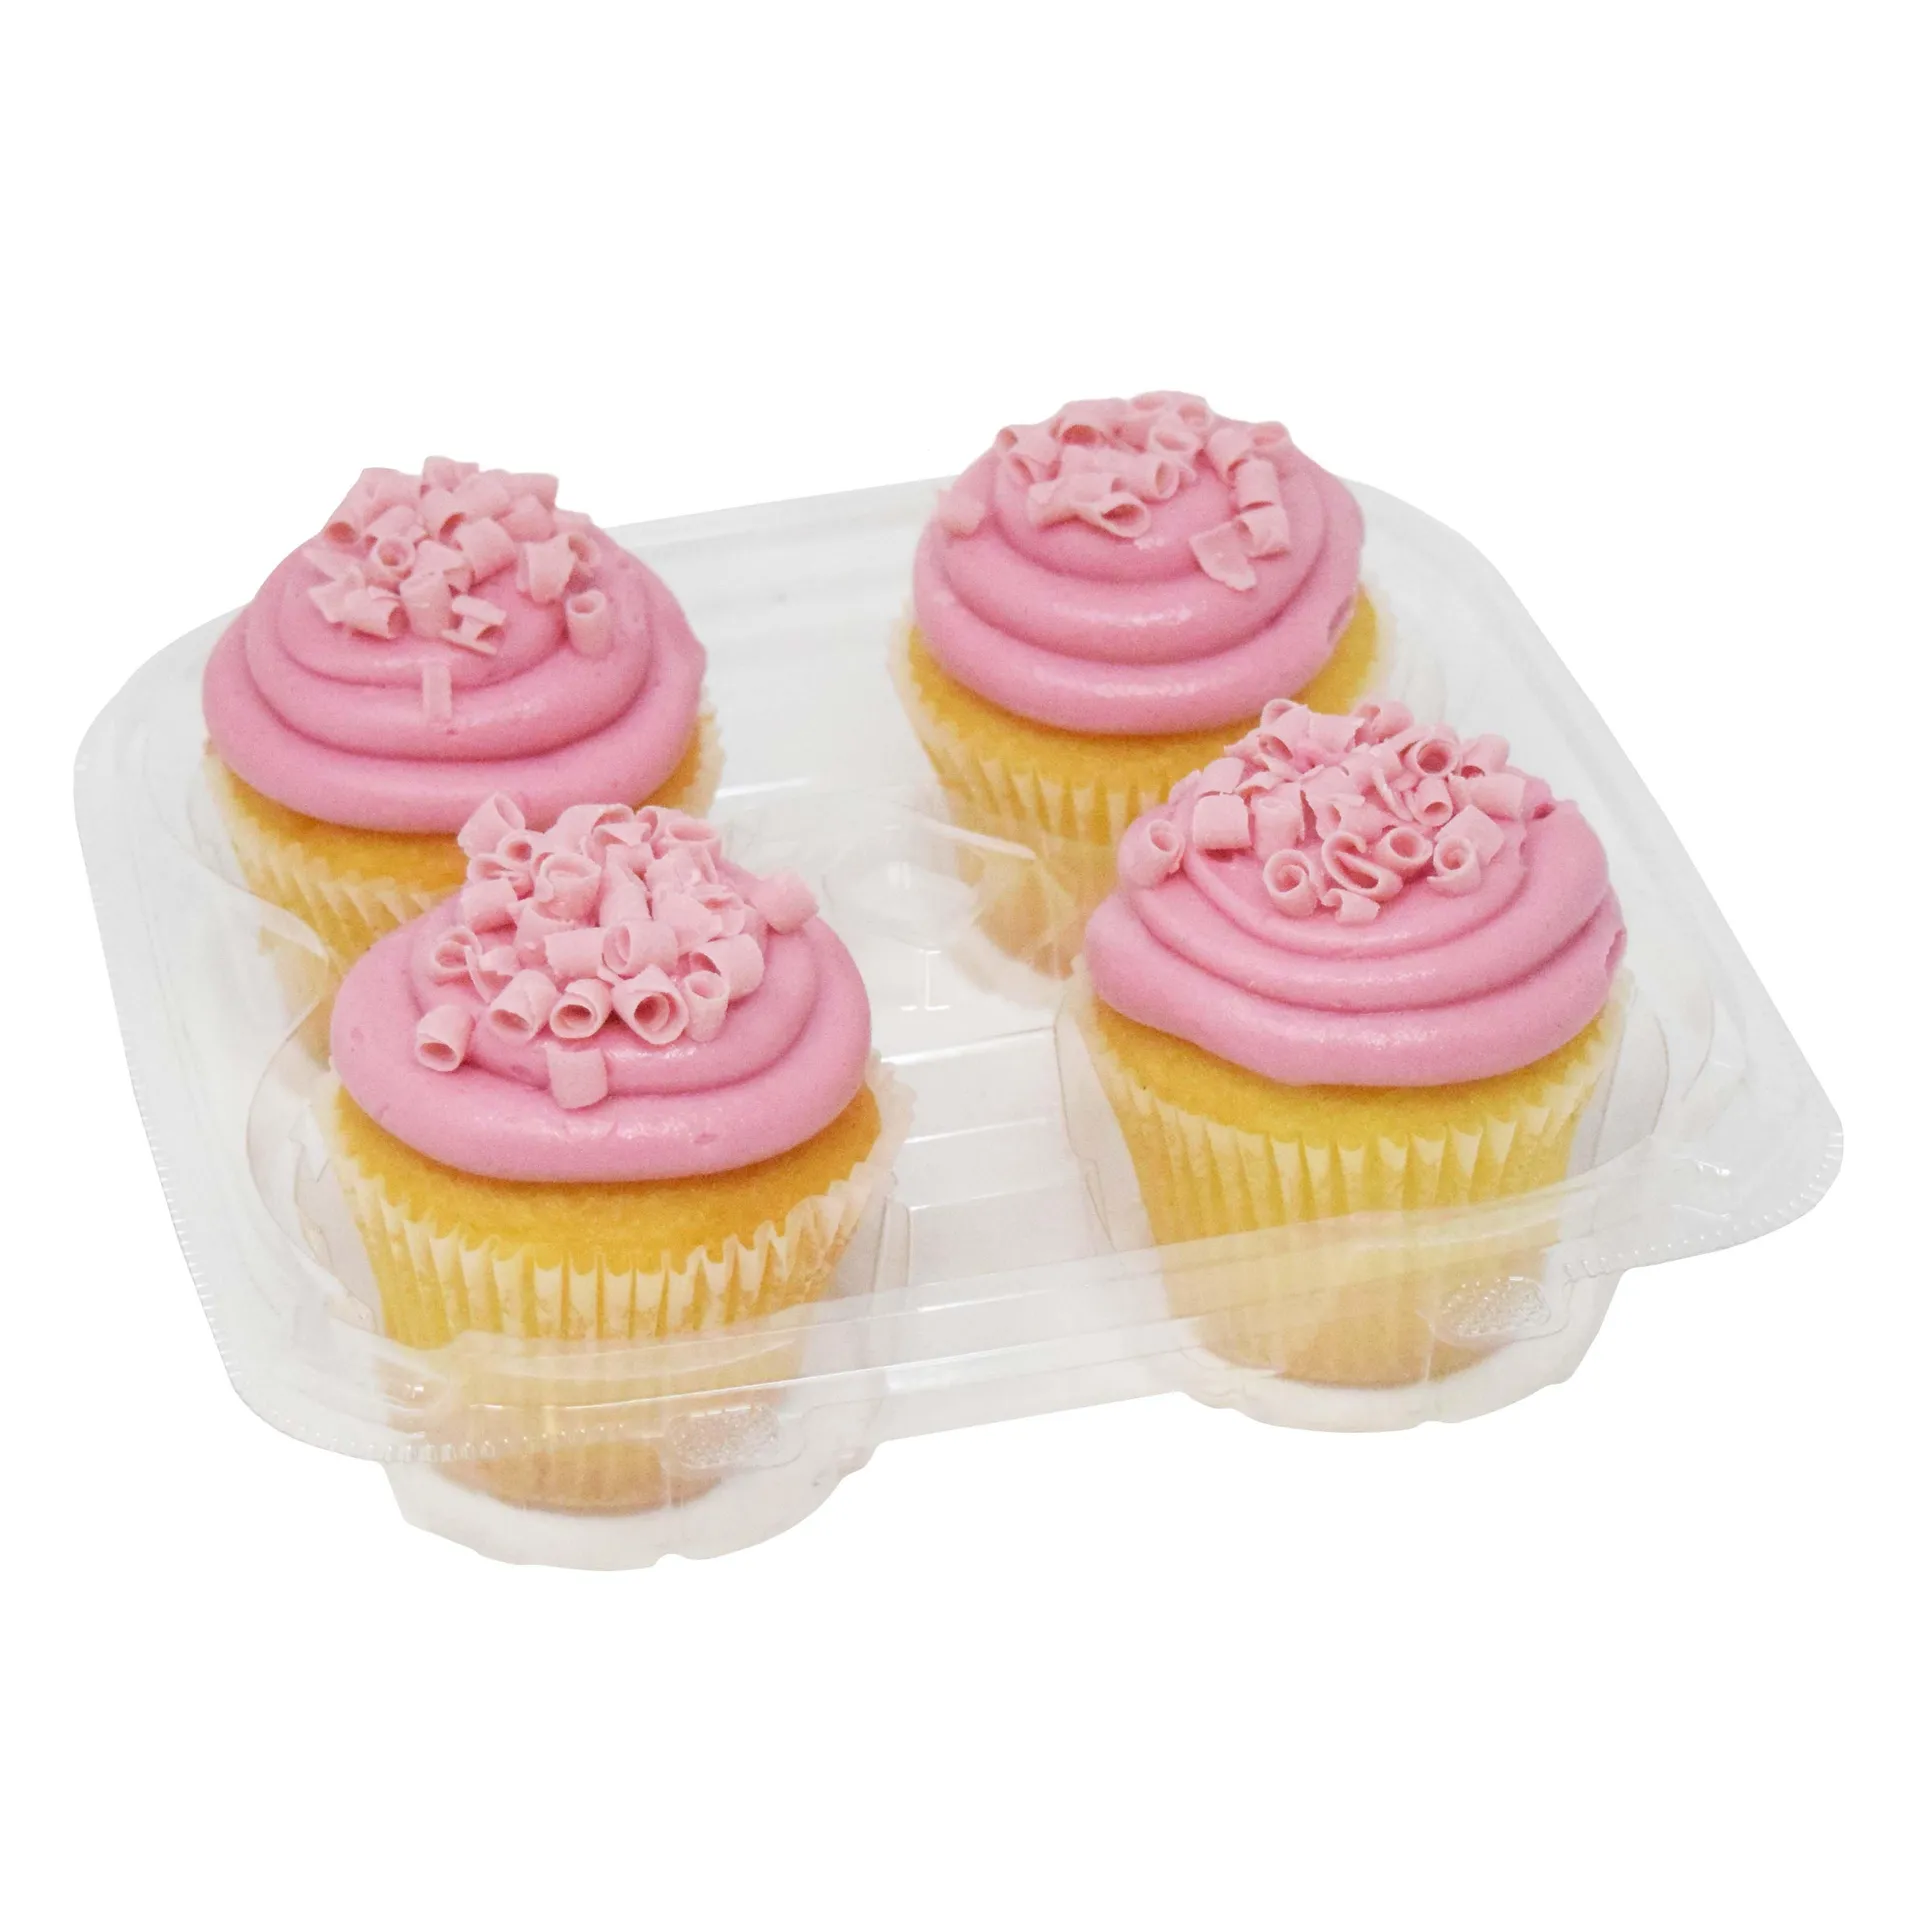 H‑E‑B Bakery Sensational Strawberry Frosted White Cupcakes